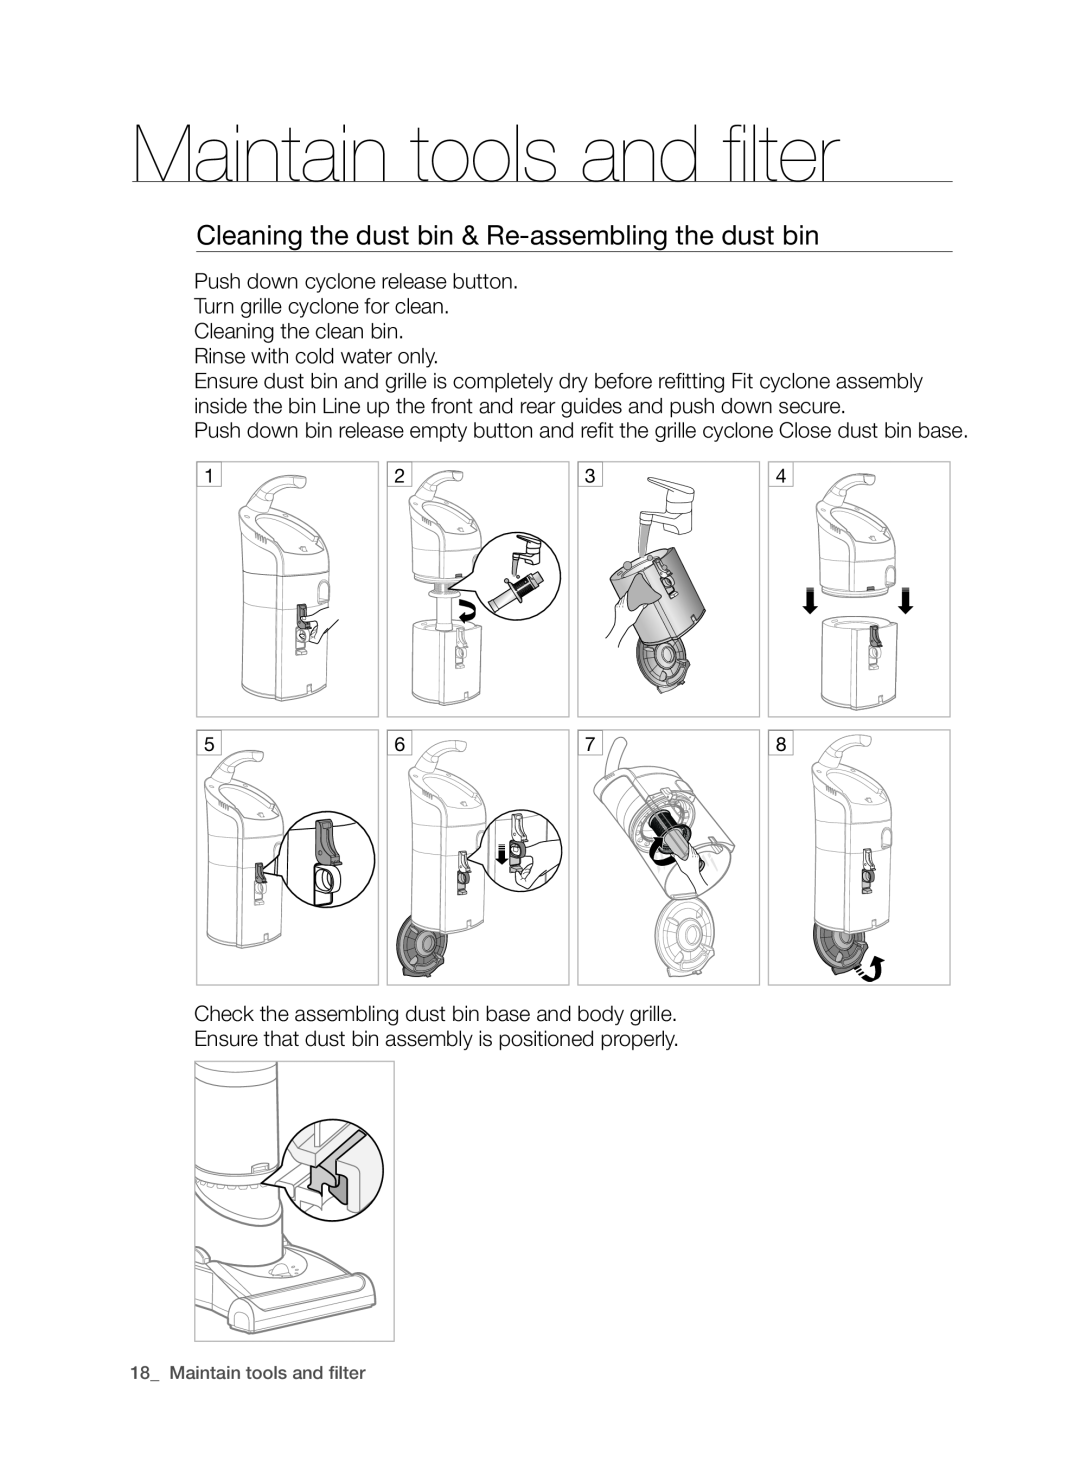 Samsung SU9380, DJ68-00264B user manual Cleaning the dust bin & Re-assemblingthe dust bin, Maintain tools and filter 